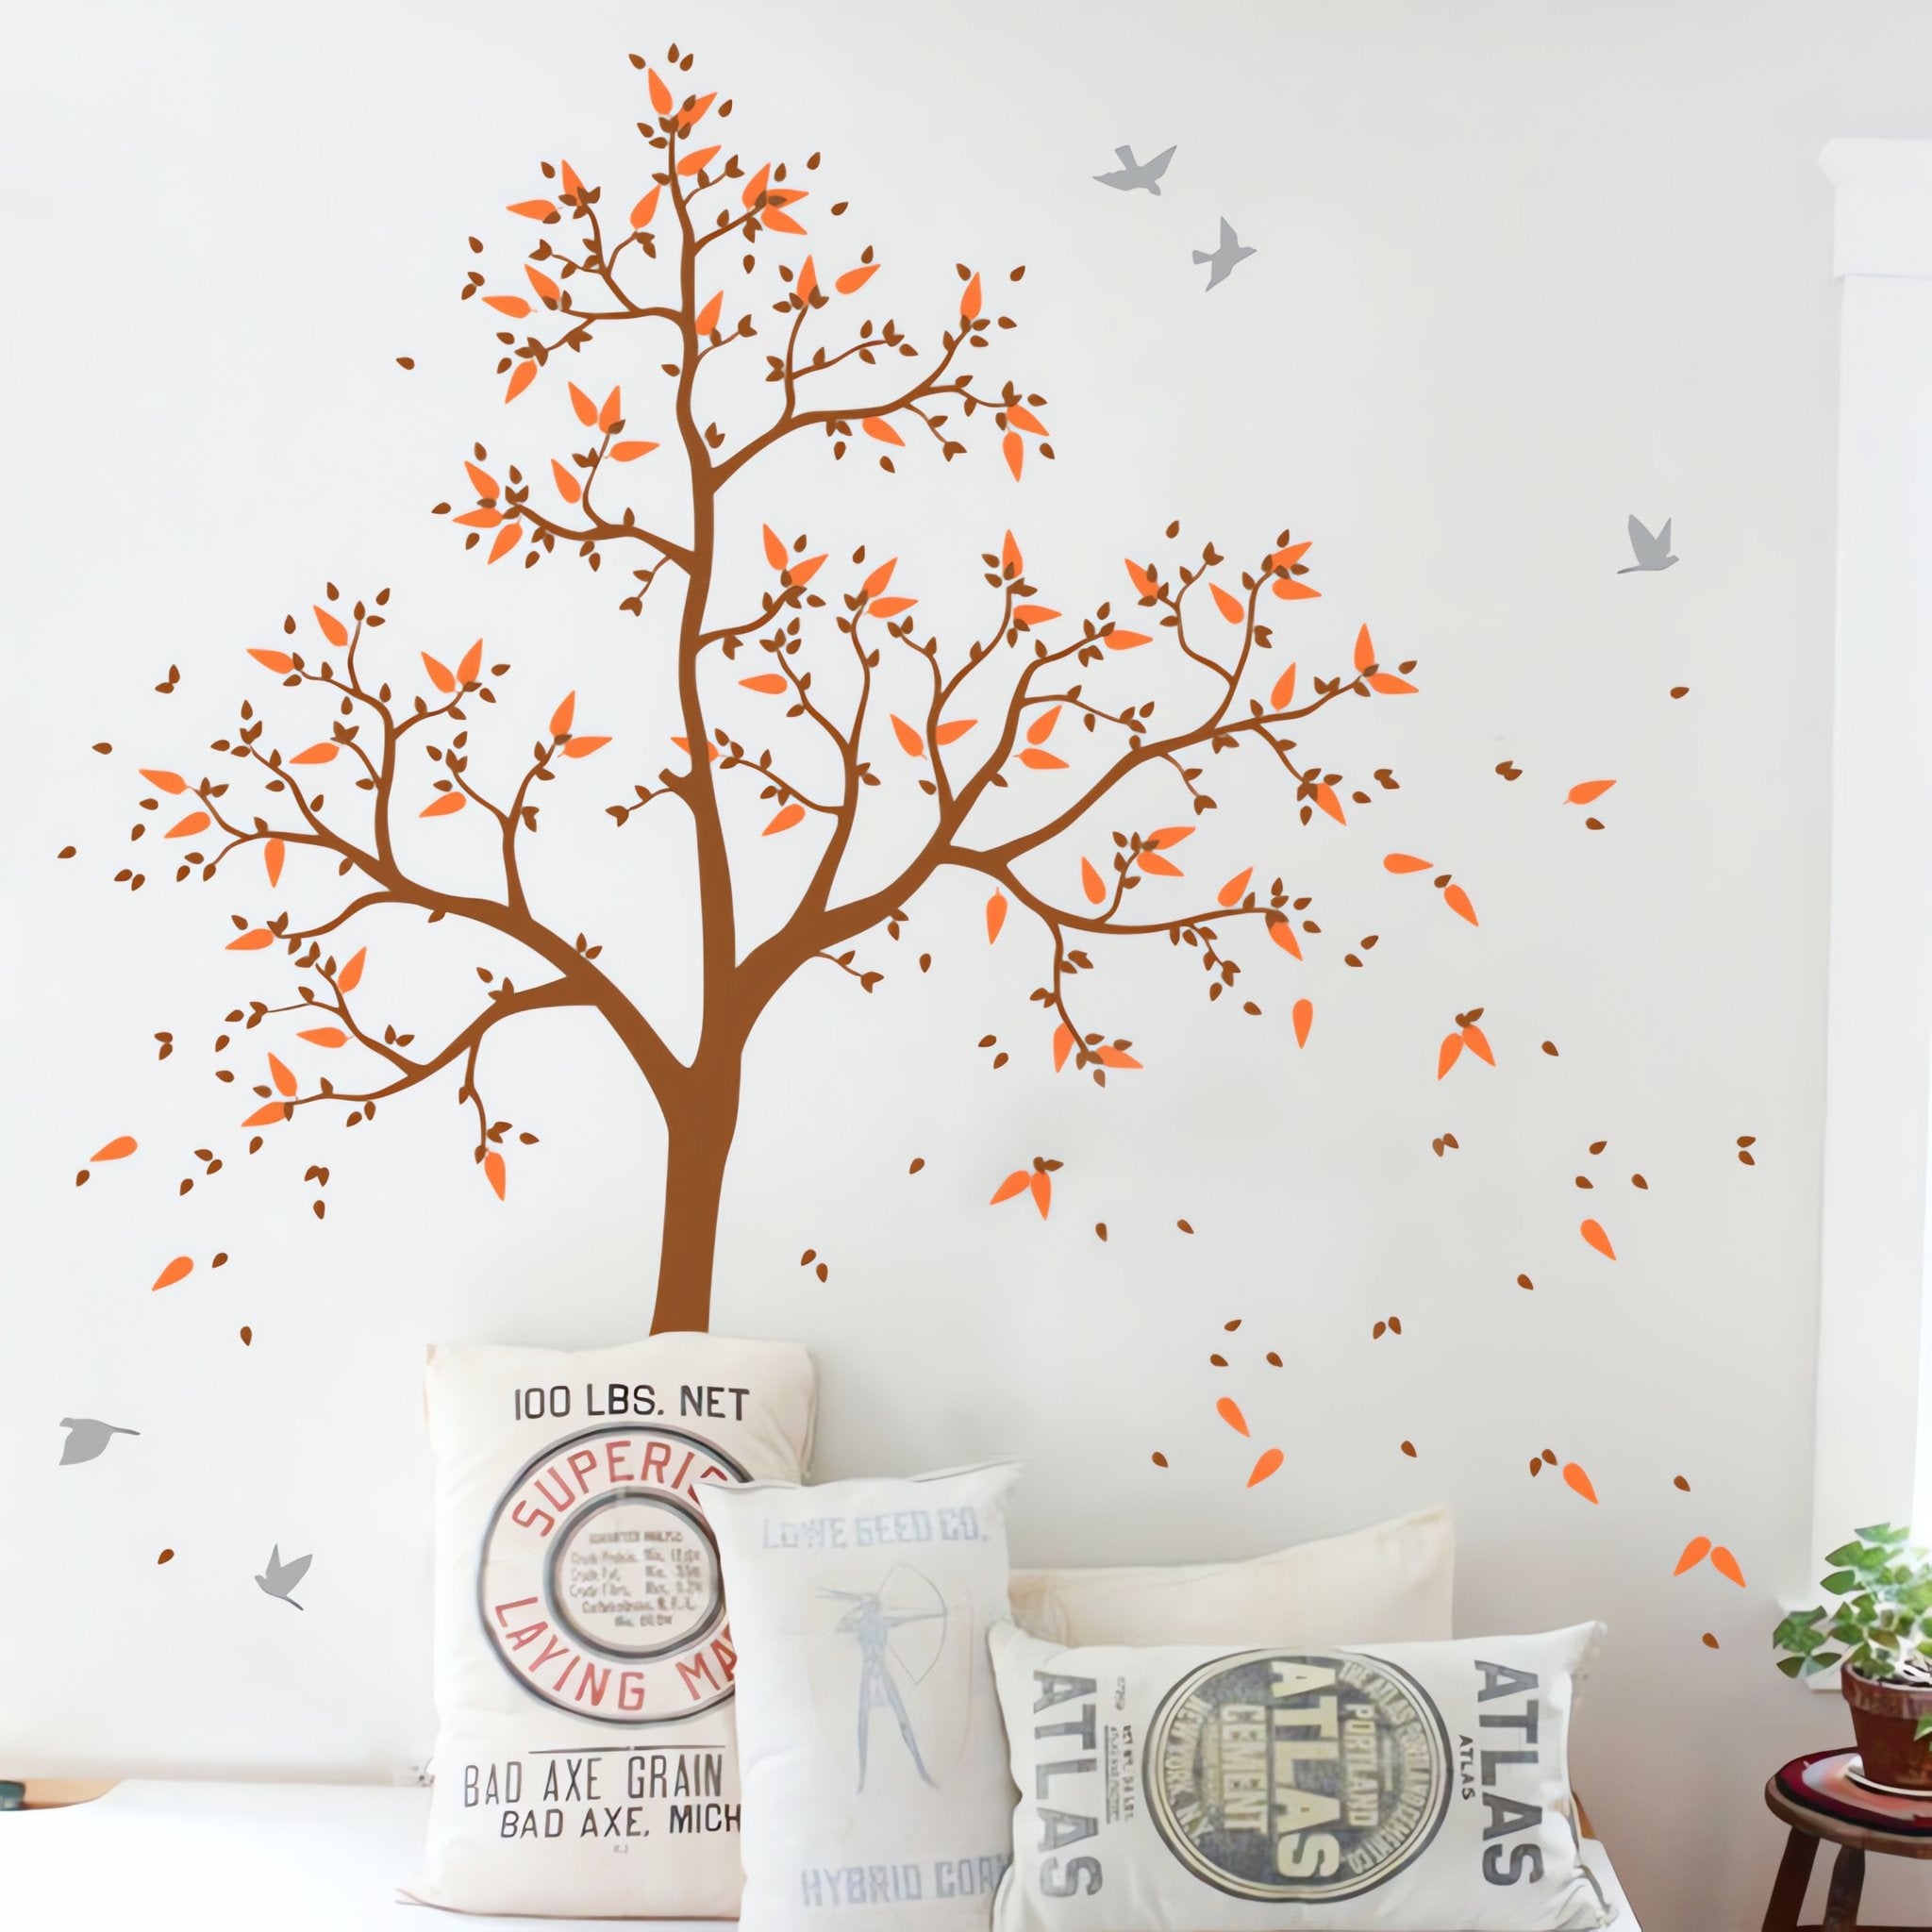 Tree wall sticker with leaves blowing, birds and a child's name above seating with cushions.